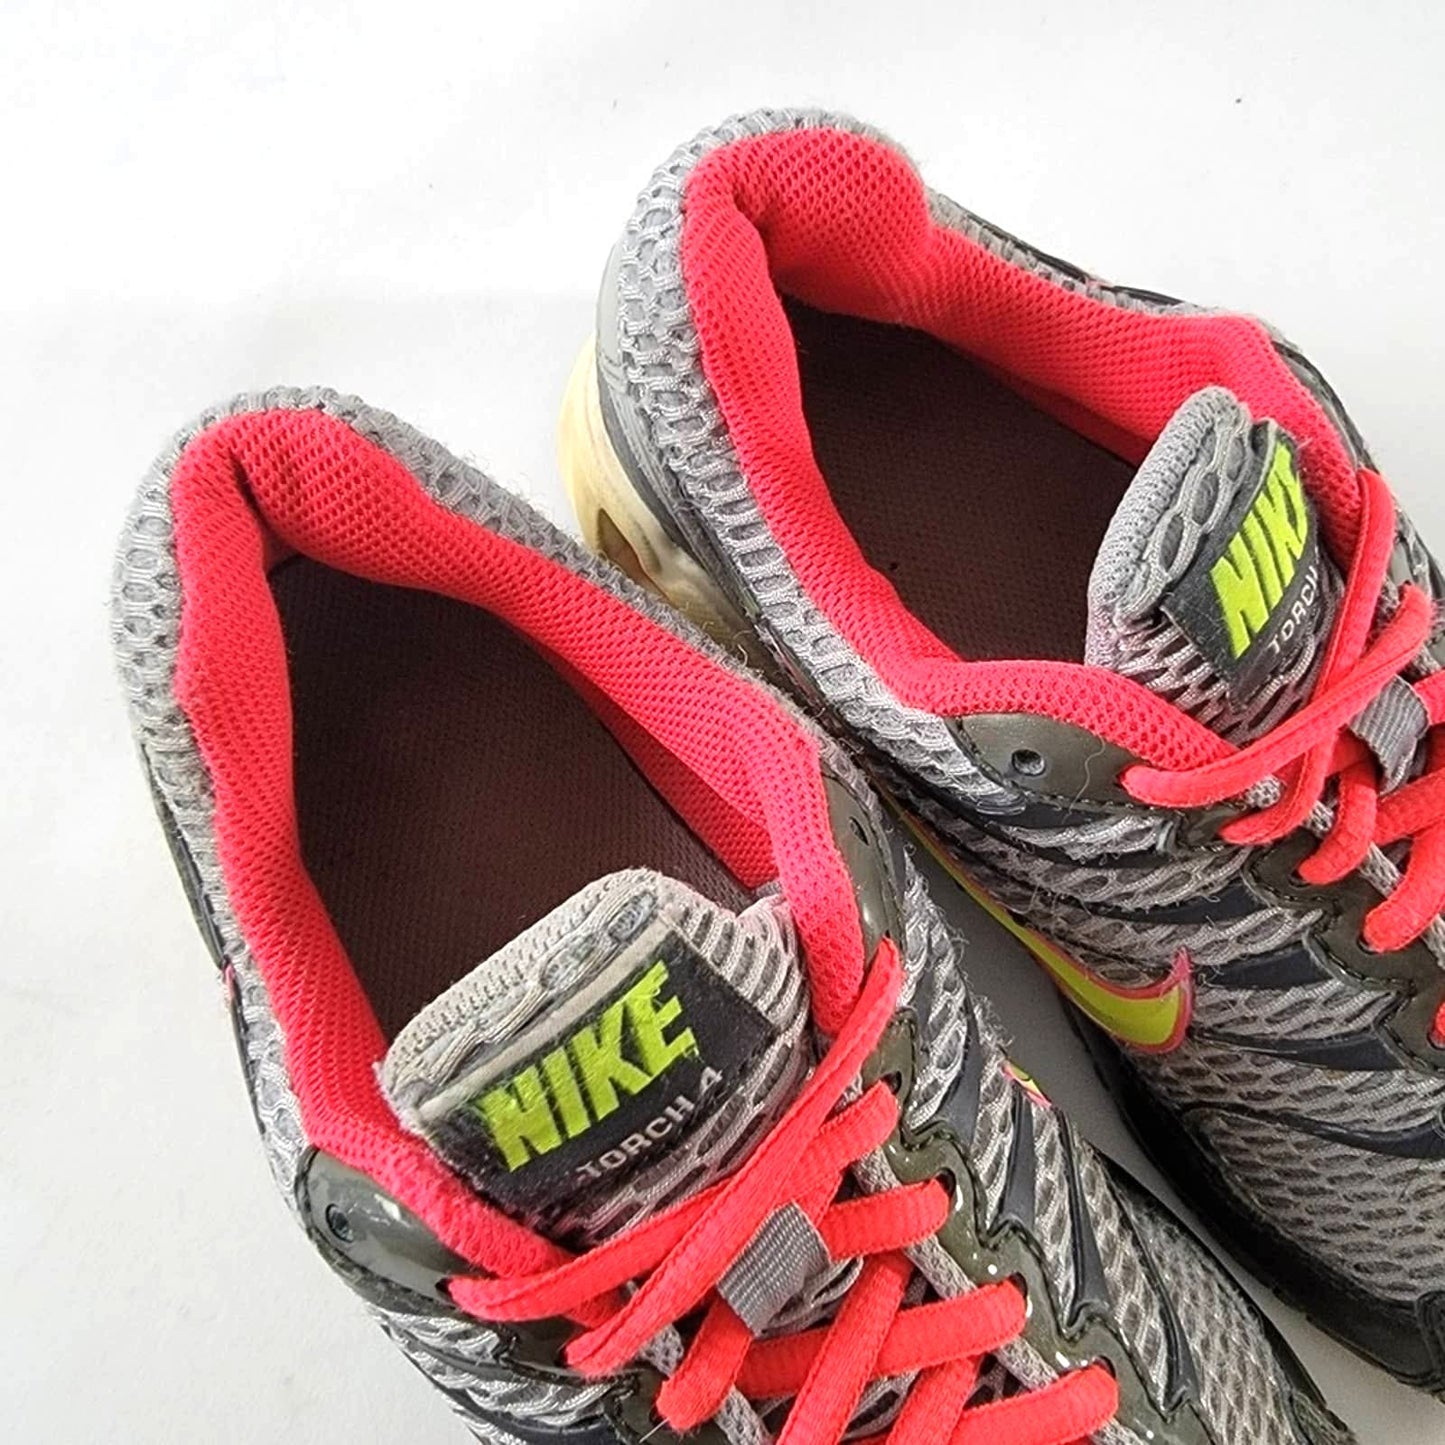 Nike Air Max Torch 4 Gray Volt Punch Running Shoes - 9